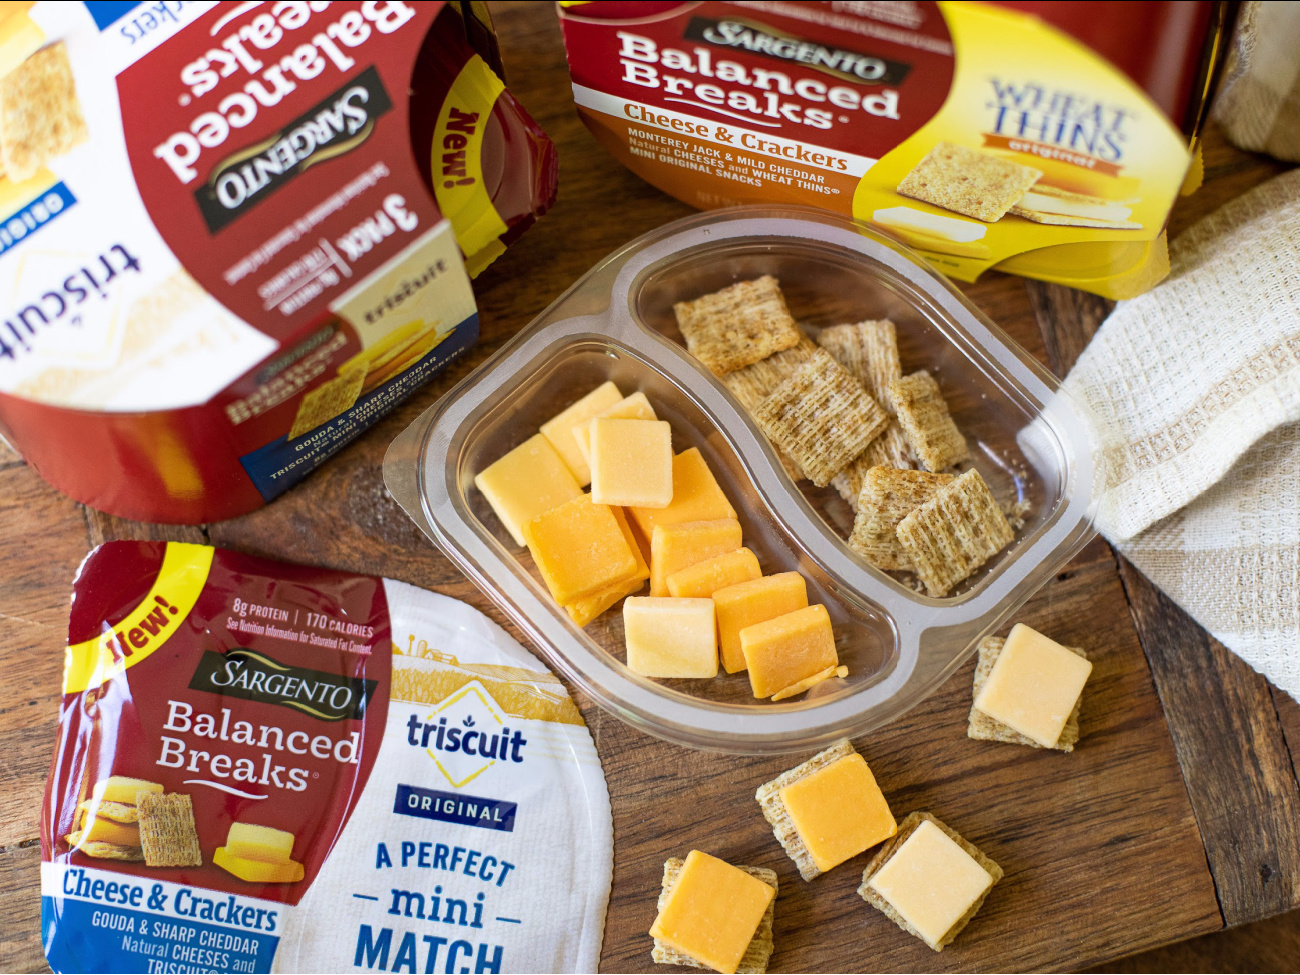 Sargento Balanced Breaks Cheese & Crackers 3-Packs Just $2.75 At Kroger